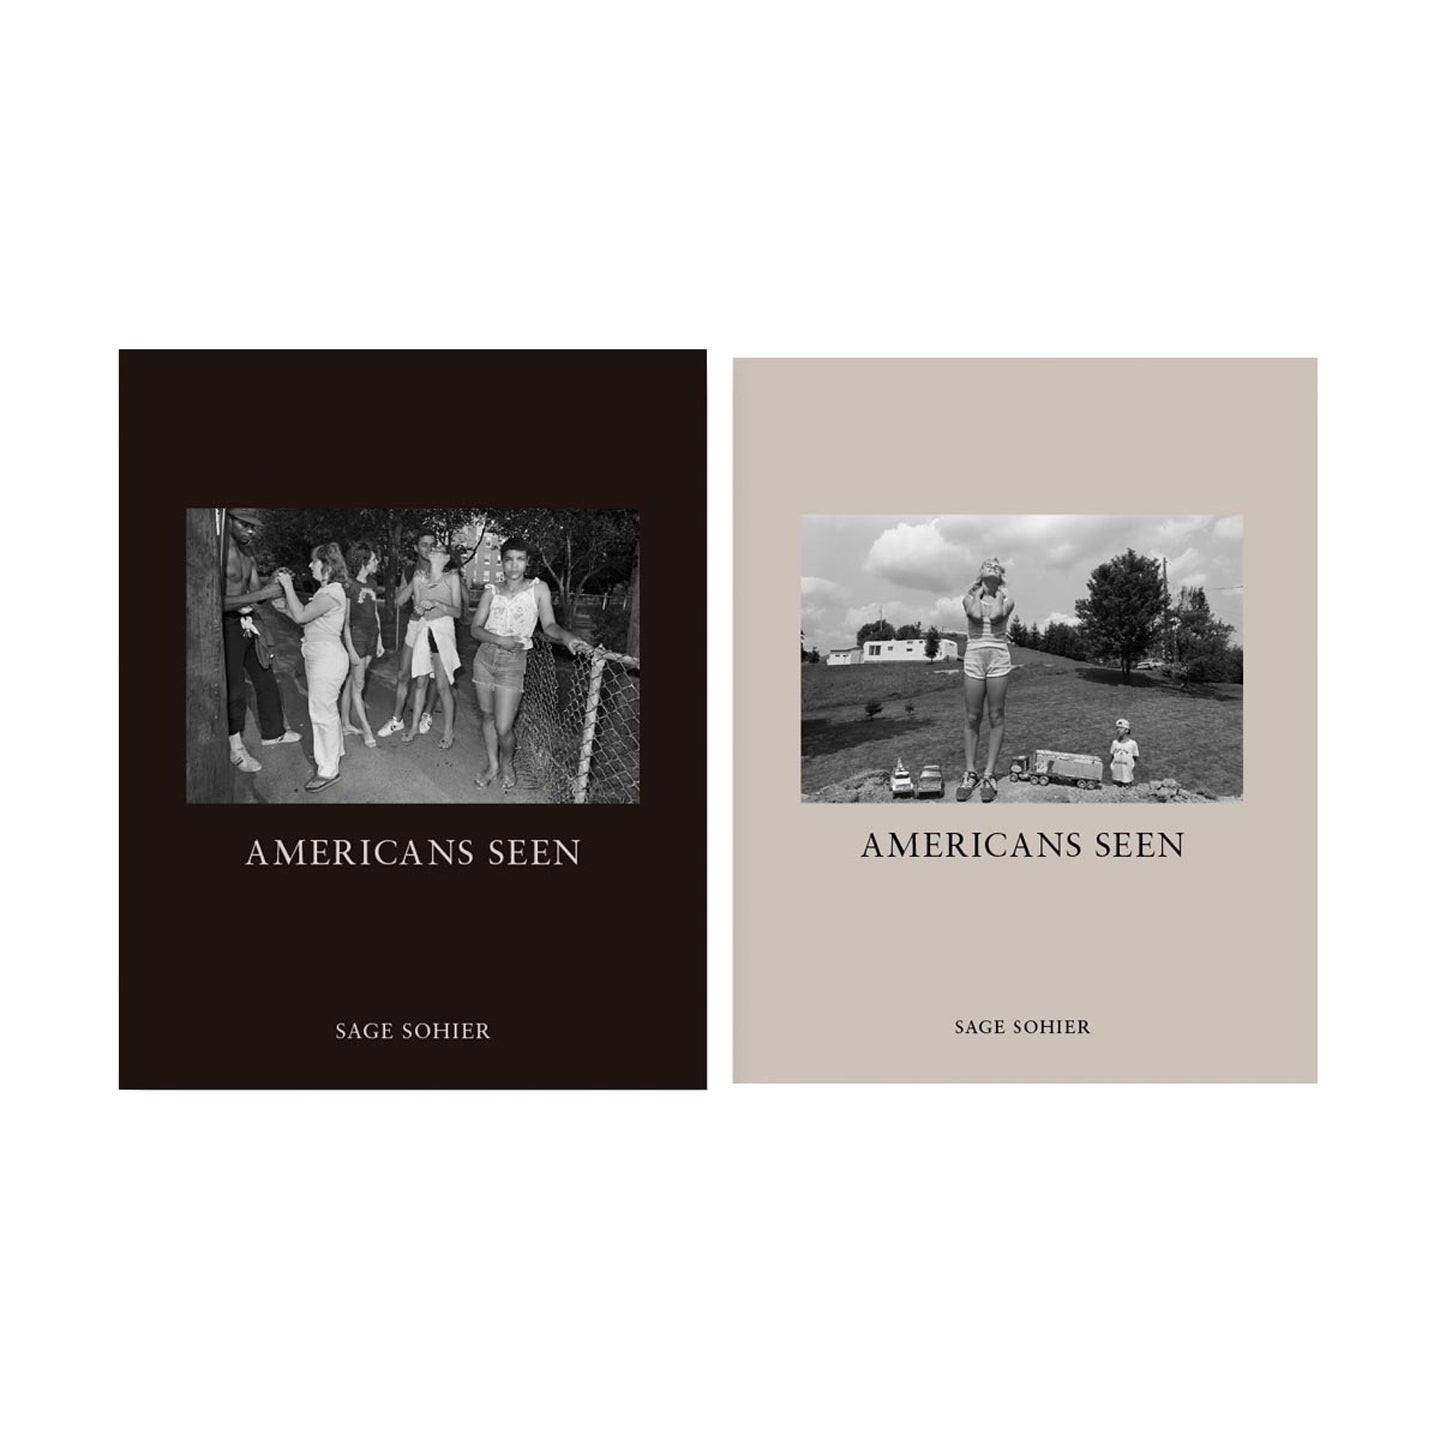 NZ Library: Set #3 (Six Volumes), Limited Edition [SIGNED]: Bevan Davies: New York, 1975; Katy Grannan: Hundreds of Sparrows: Volume One; Anthony Hernandez: Discarded; John Humble: Manifest Destiny; Sage Sohier: Americans Seen; Mark Steinmetz: Angel City West: Volume Two (2)